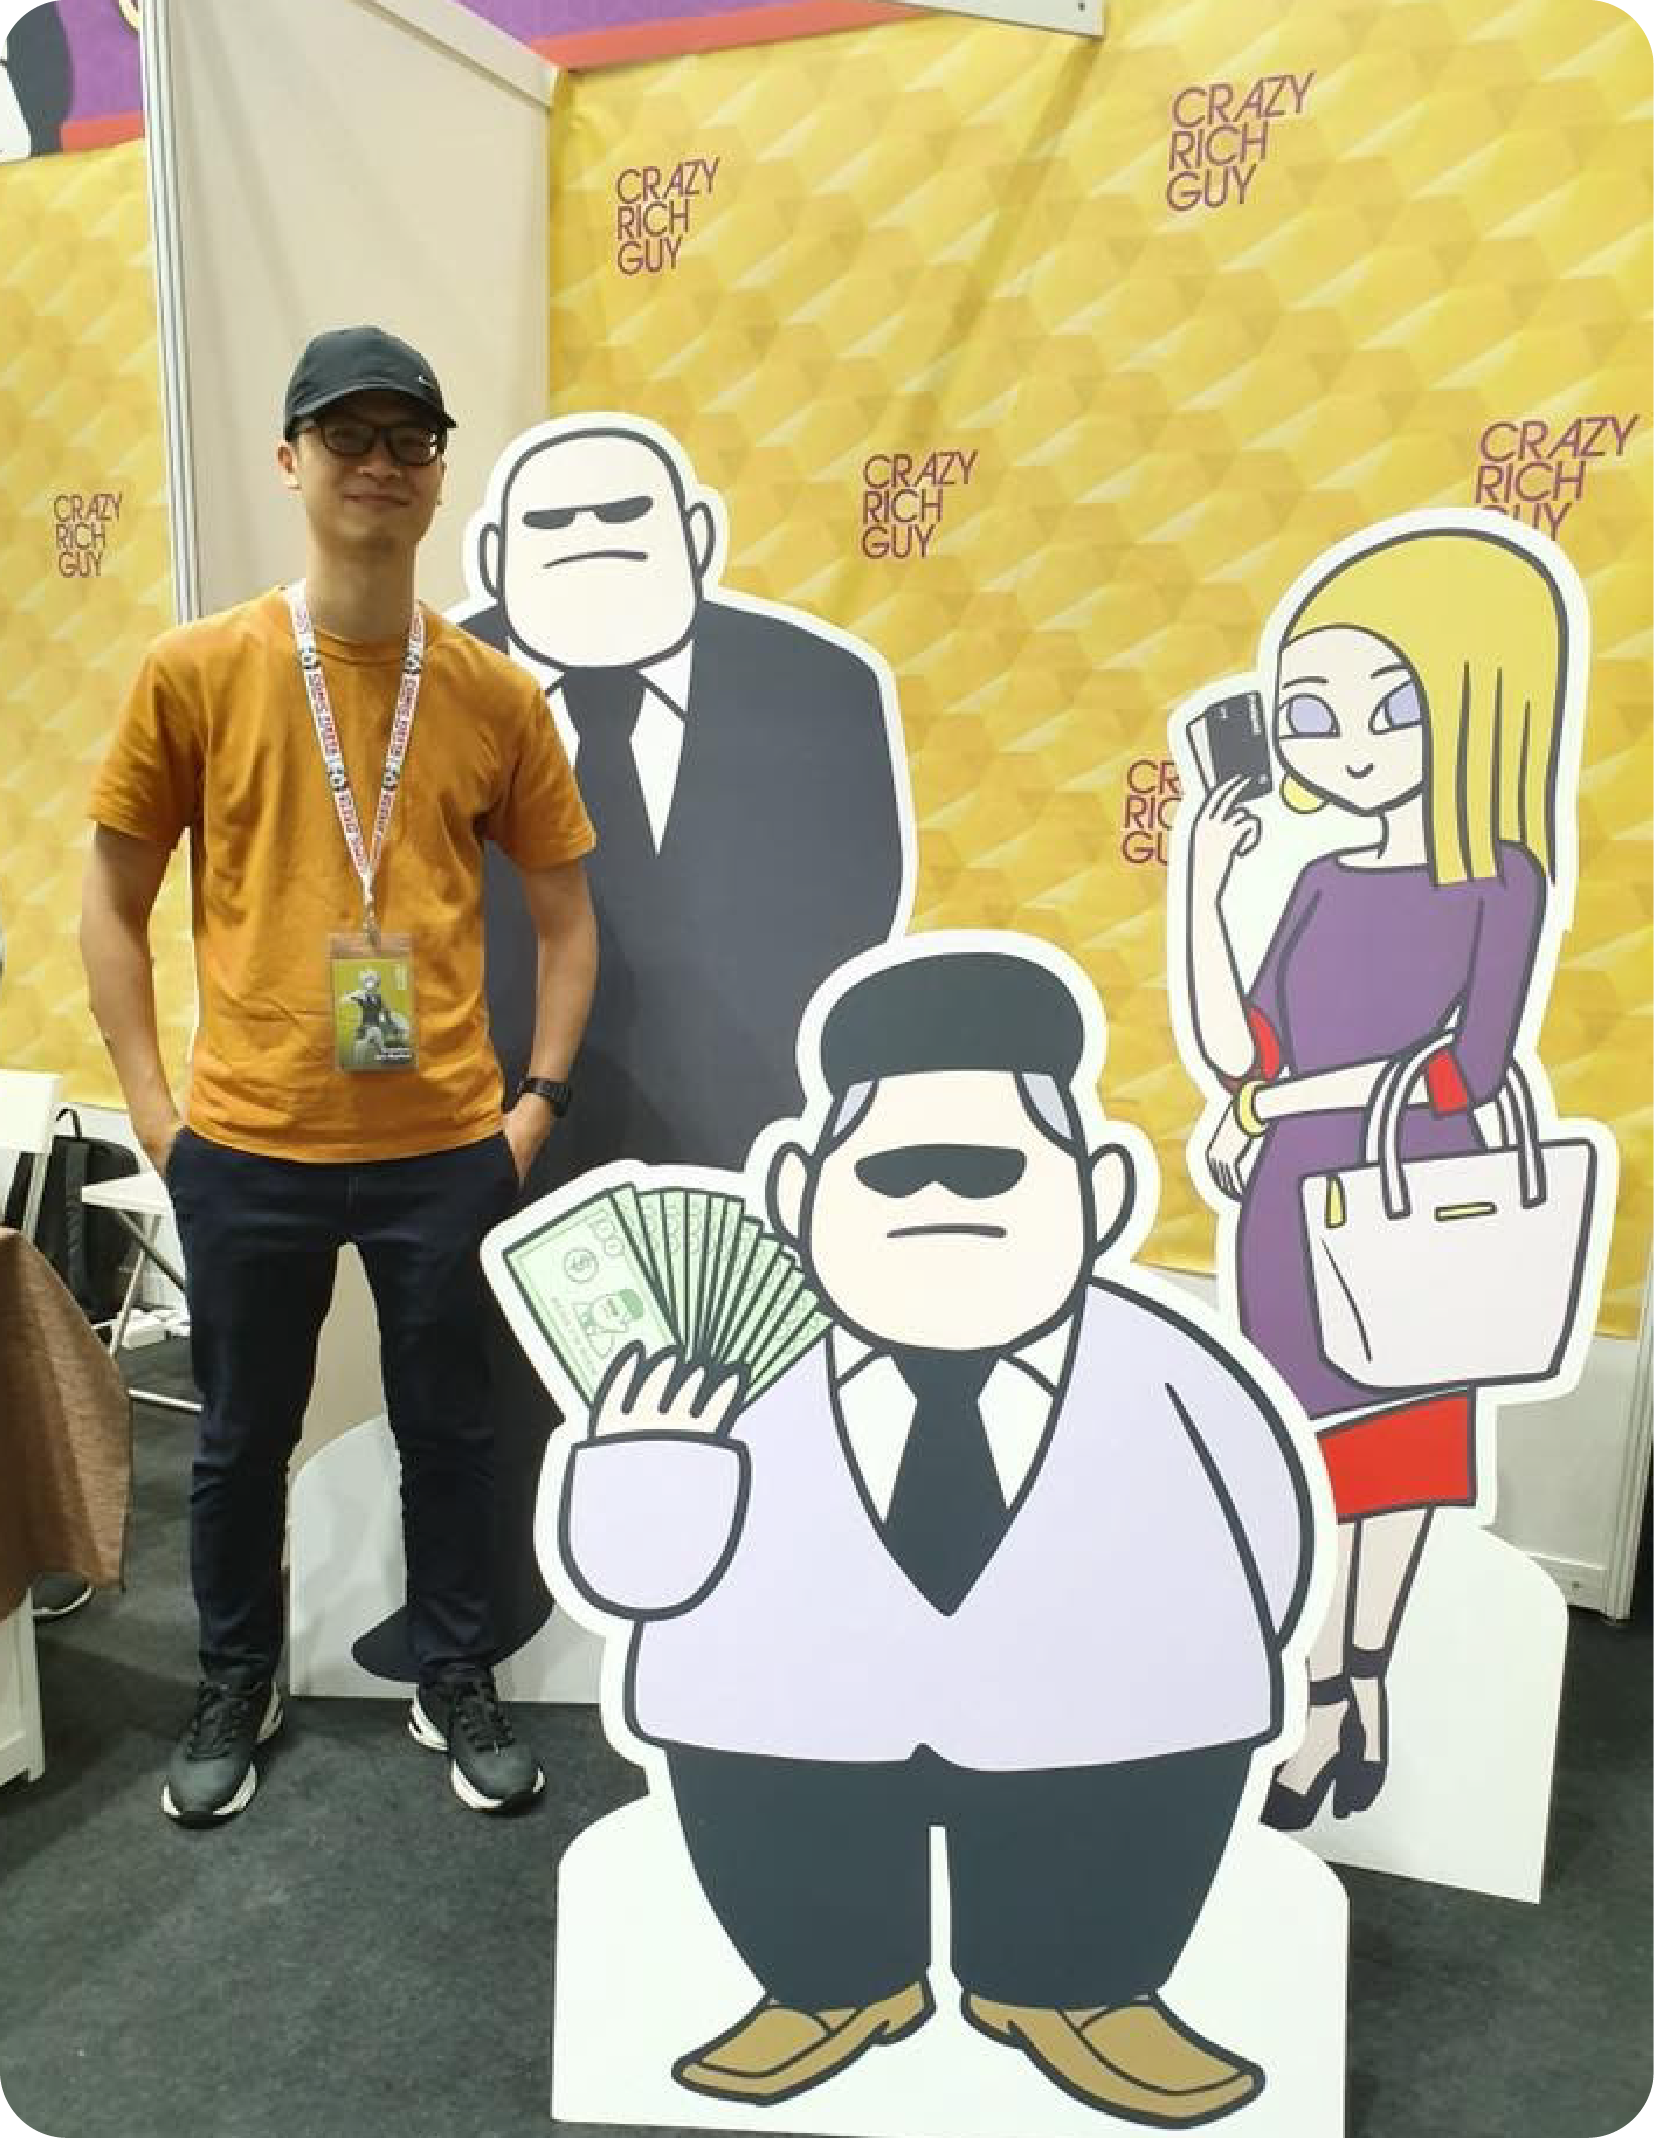 Nixon Siow: The Malaysian Comic Artist Who Made A Crazy Rich Guy Went Viral  On Facebook | STIVE ASIA